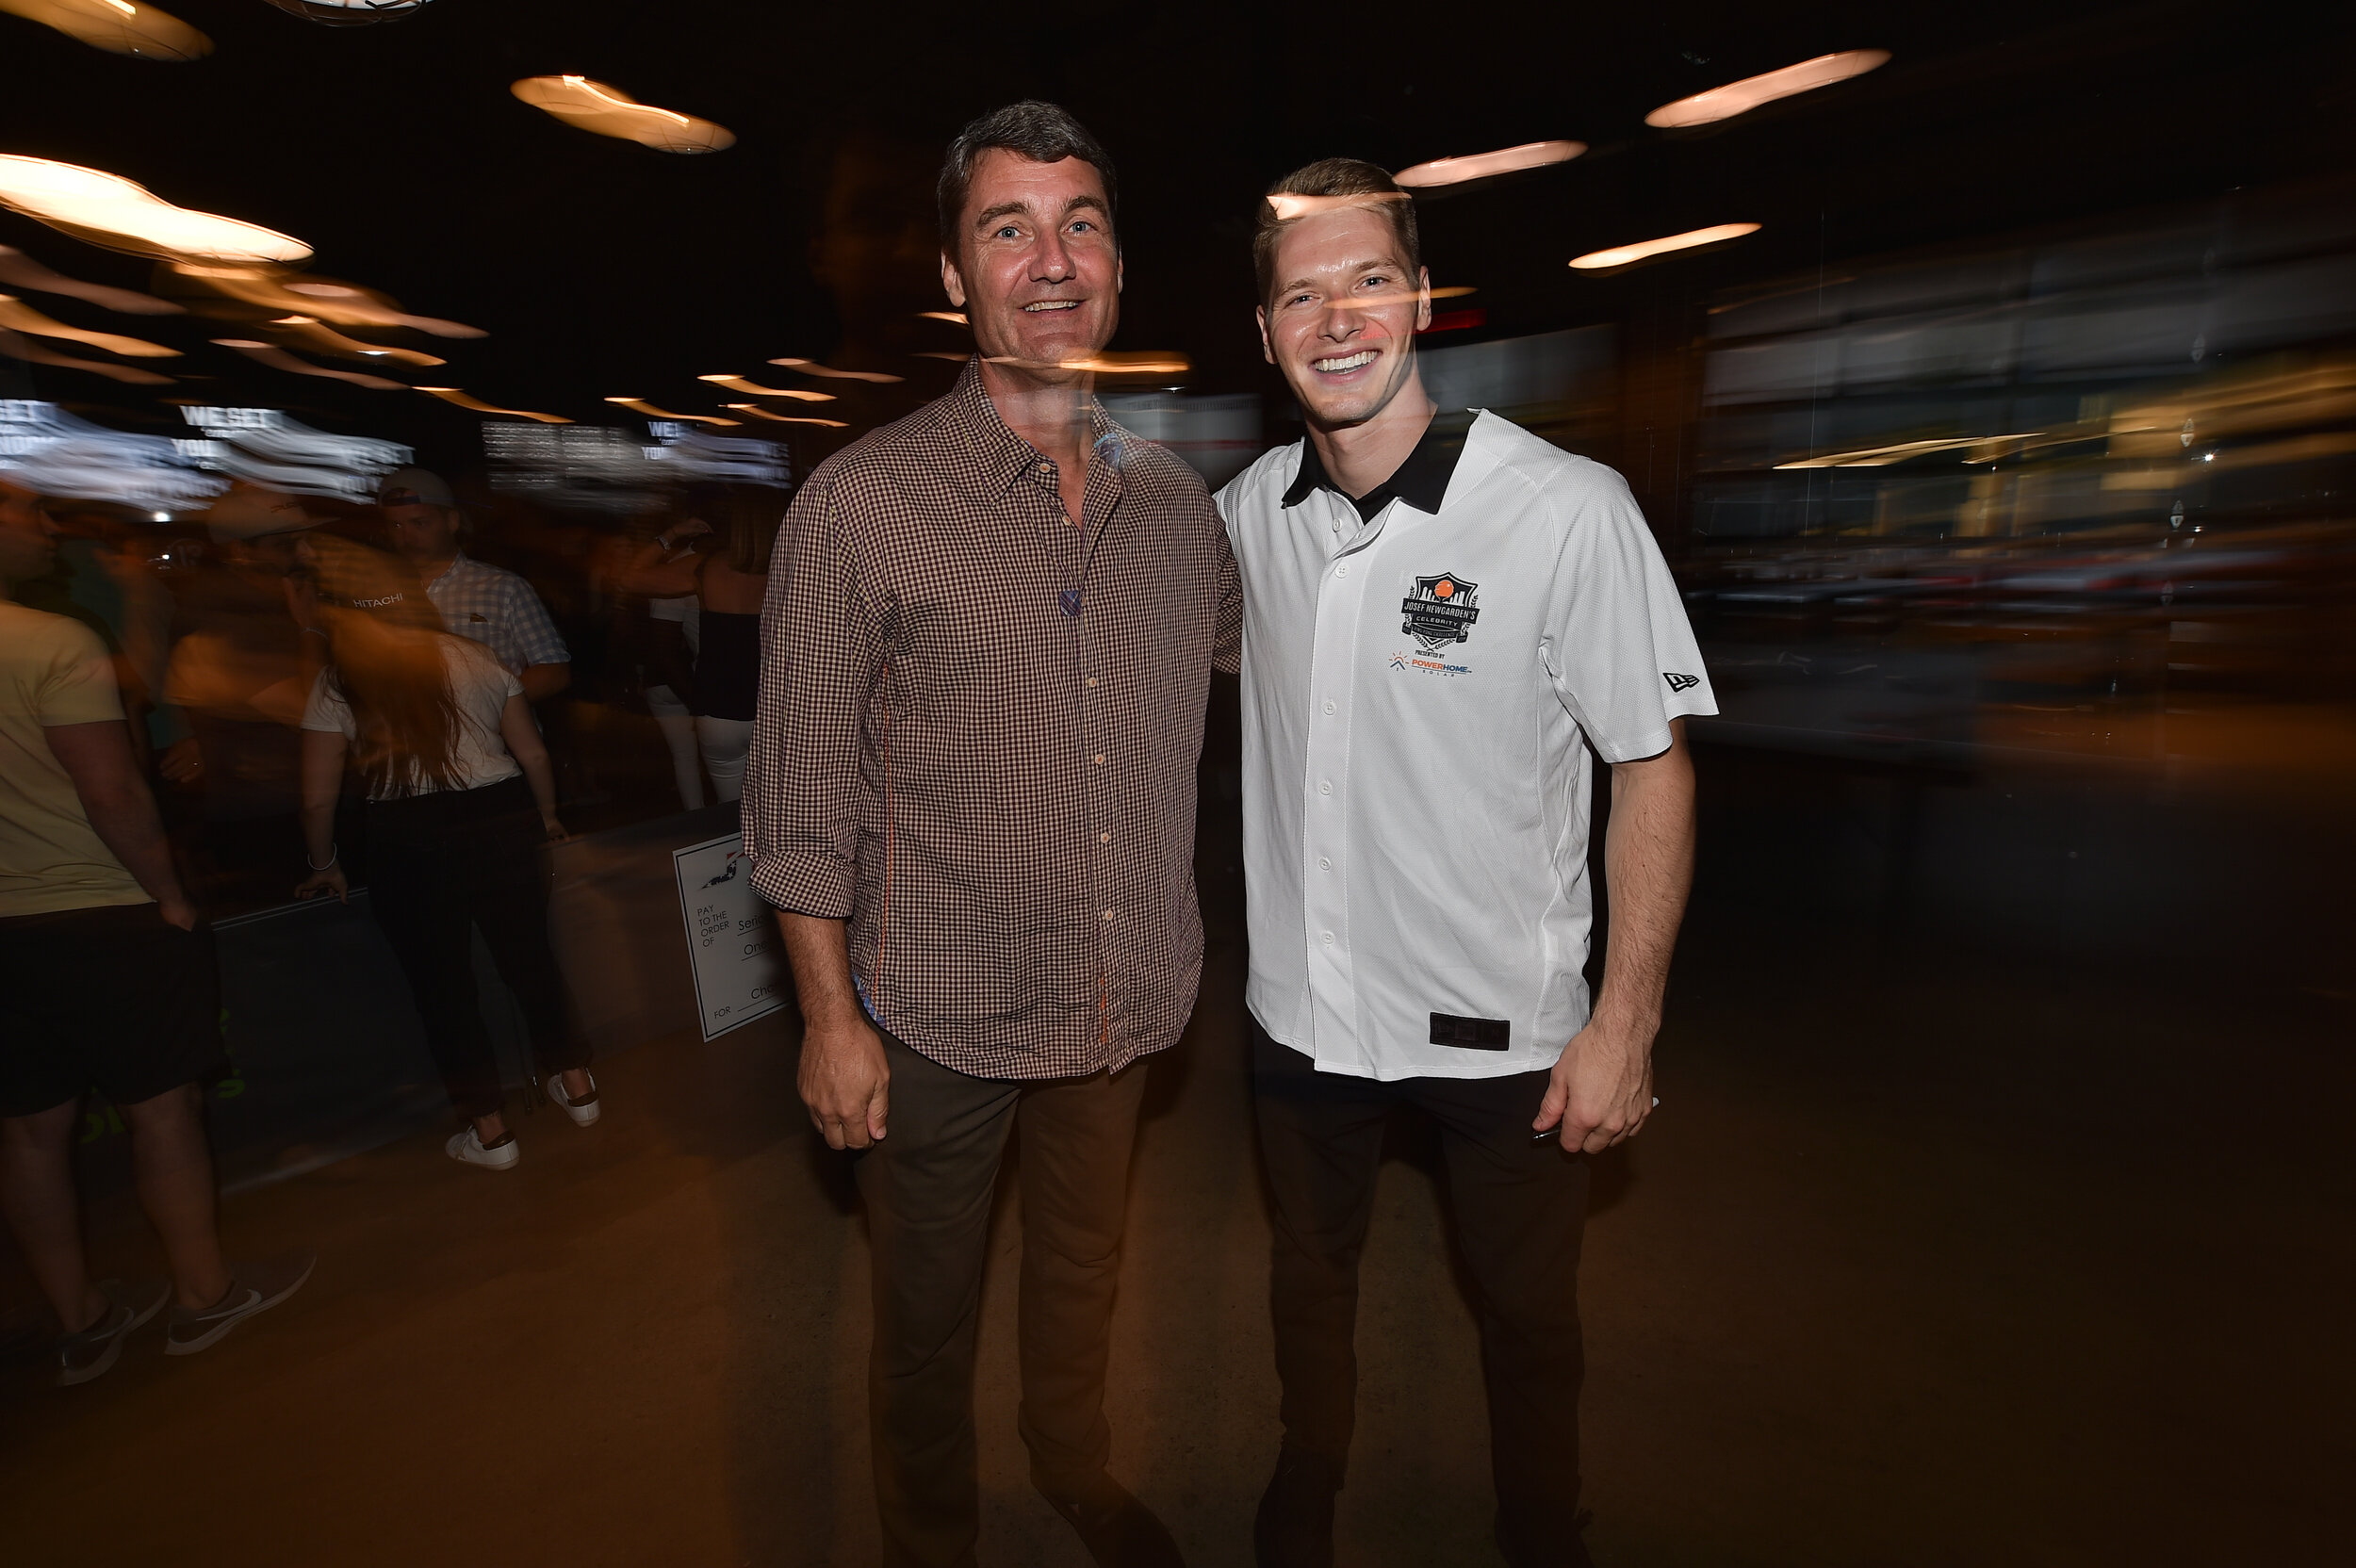 Tim Cindric &amp; Josef Newgarden hang out at Josef Newgarden's Celebrity Ping-Pong Challenge.